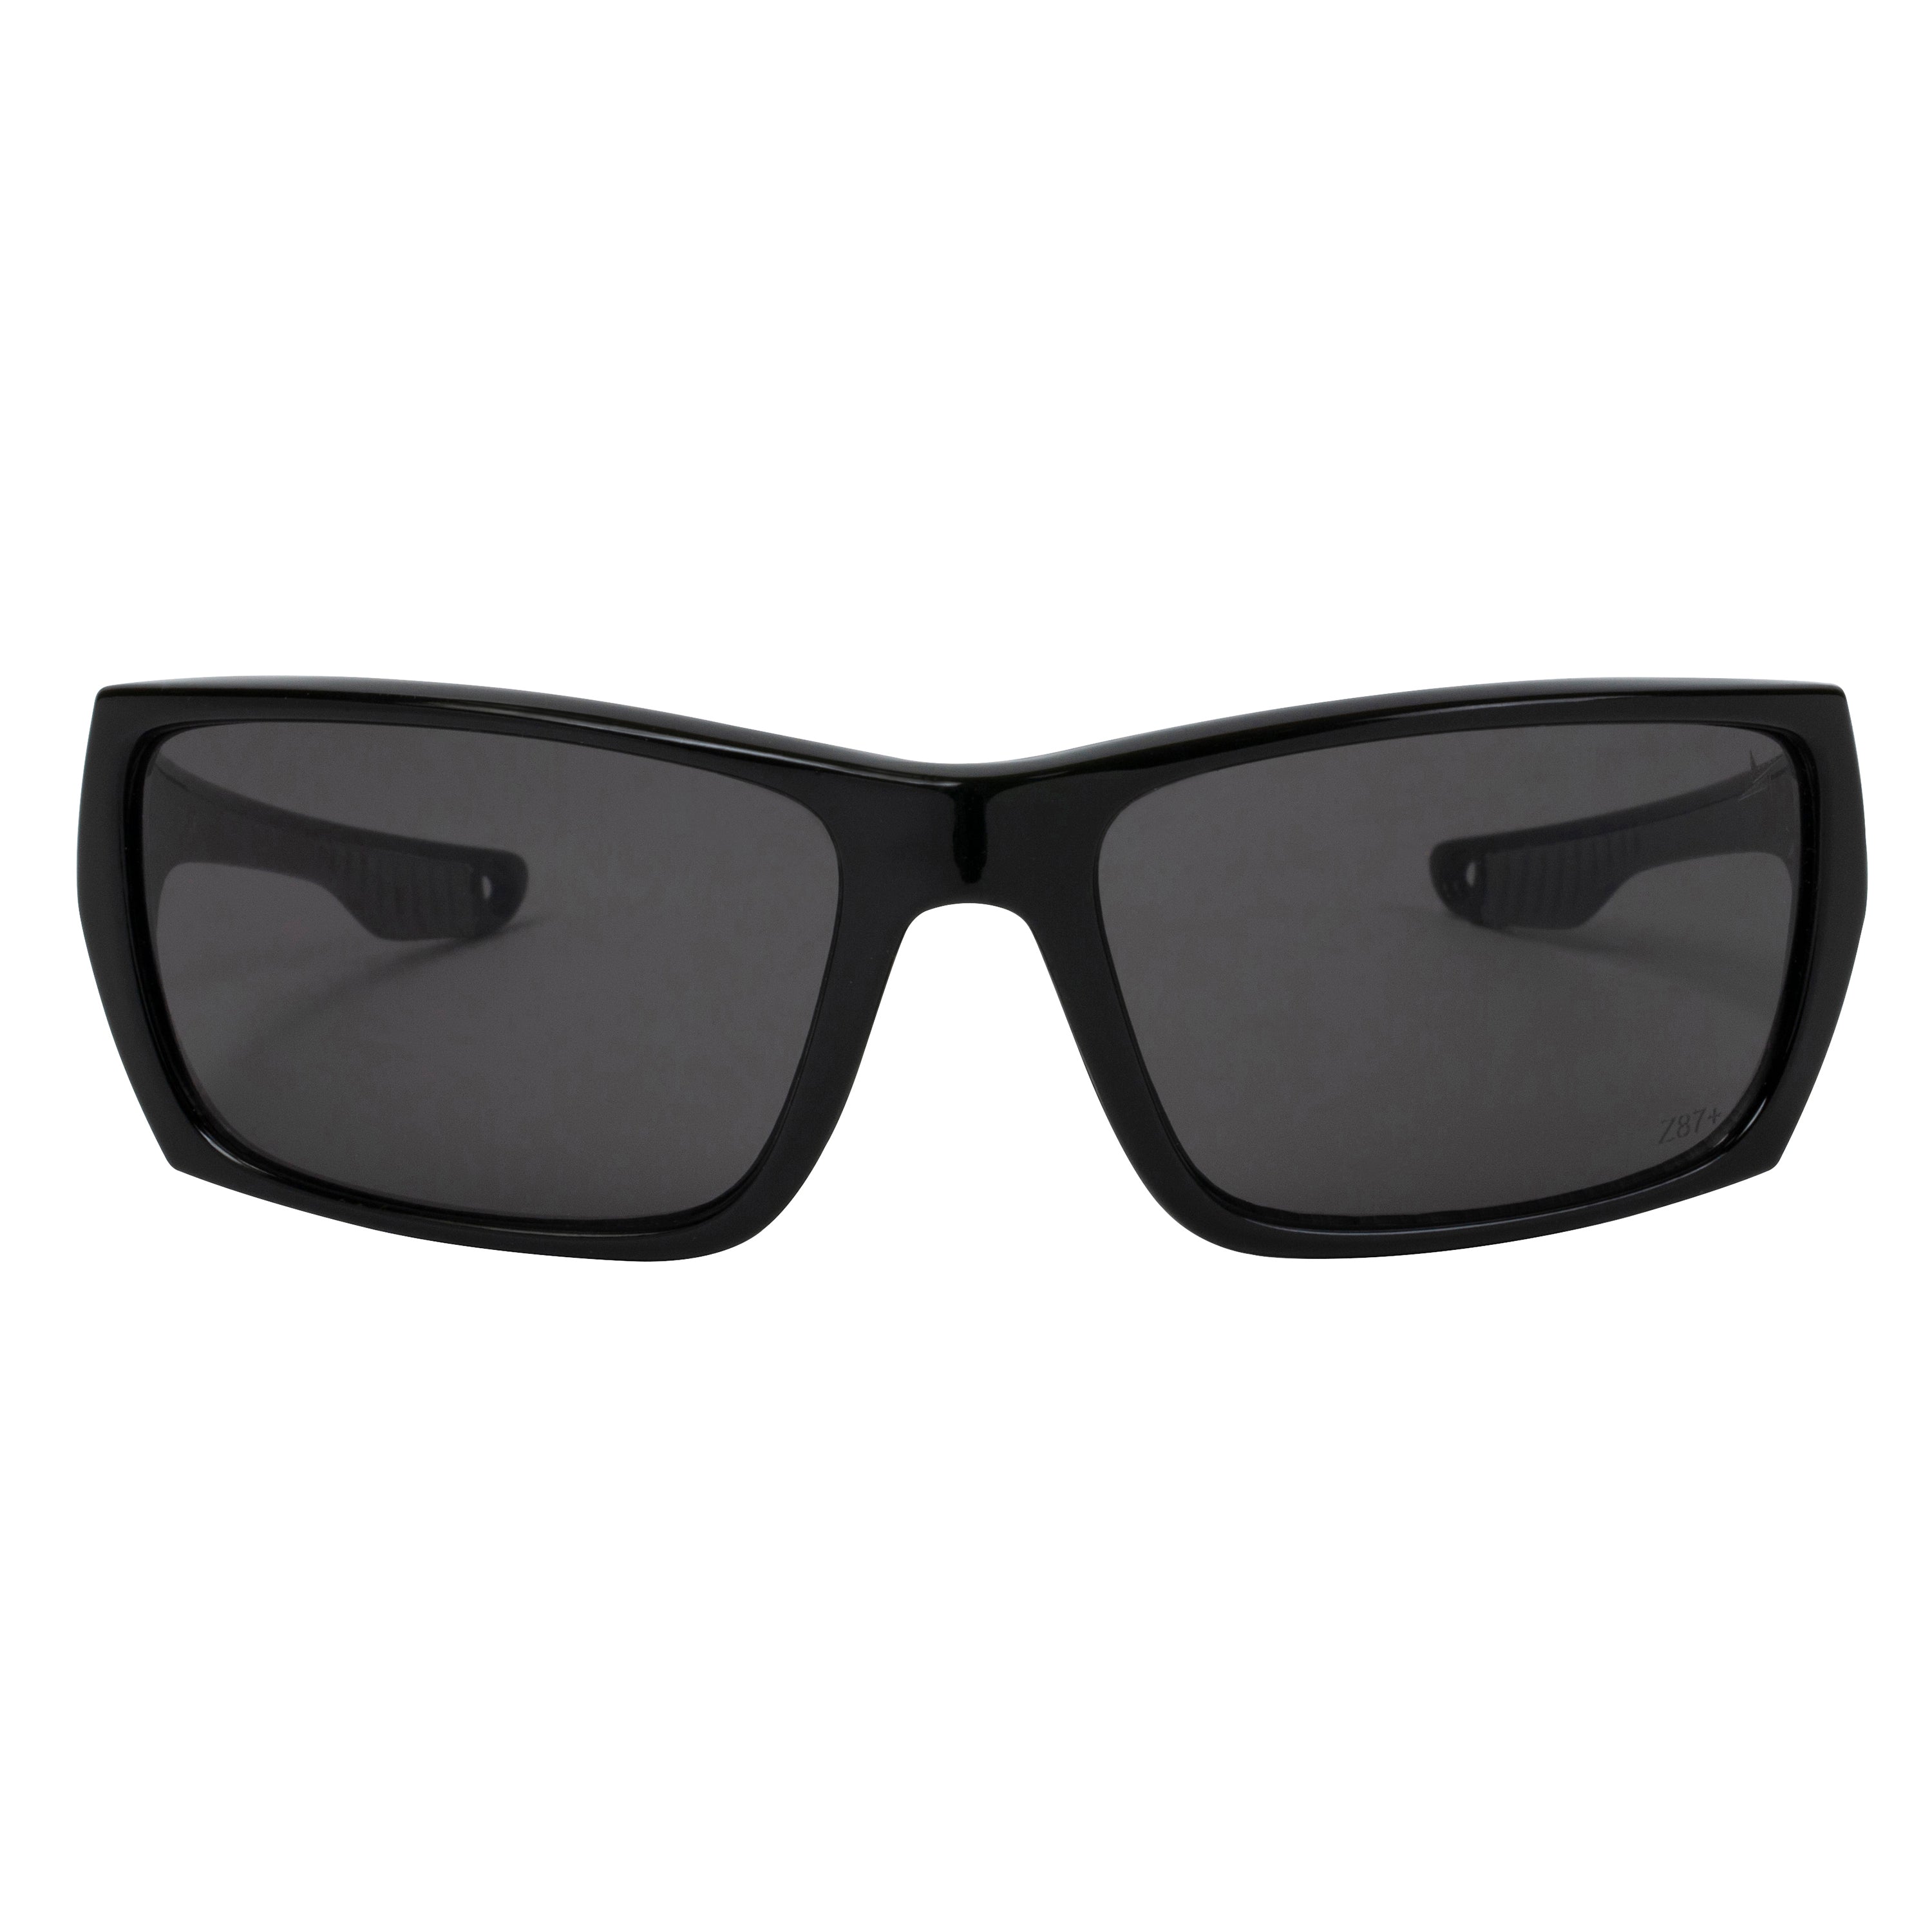 Dark Smoke Lens Sport Safety Sunglasses with Grey Rubber Accents.